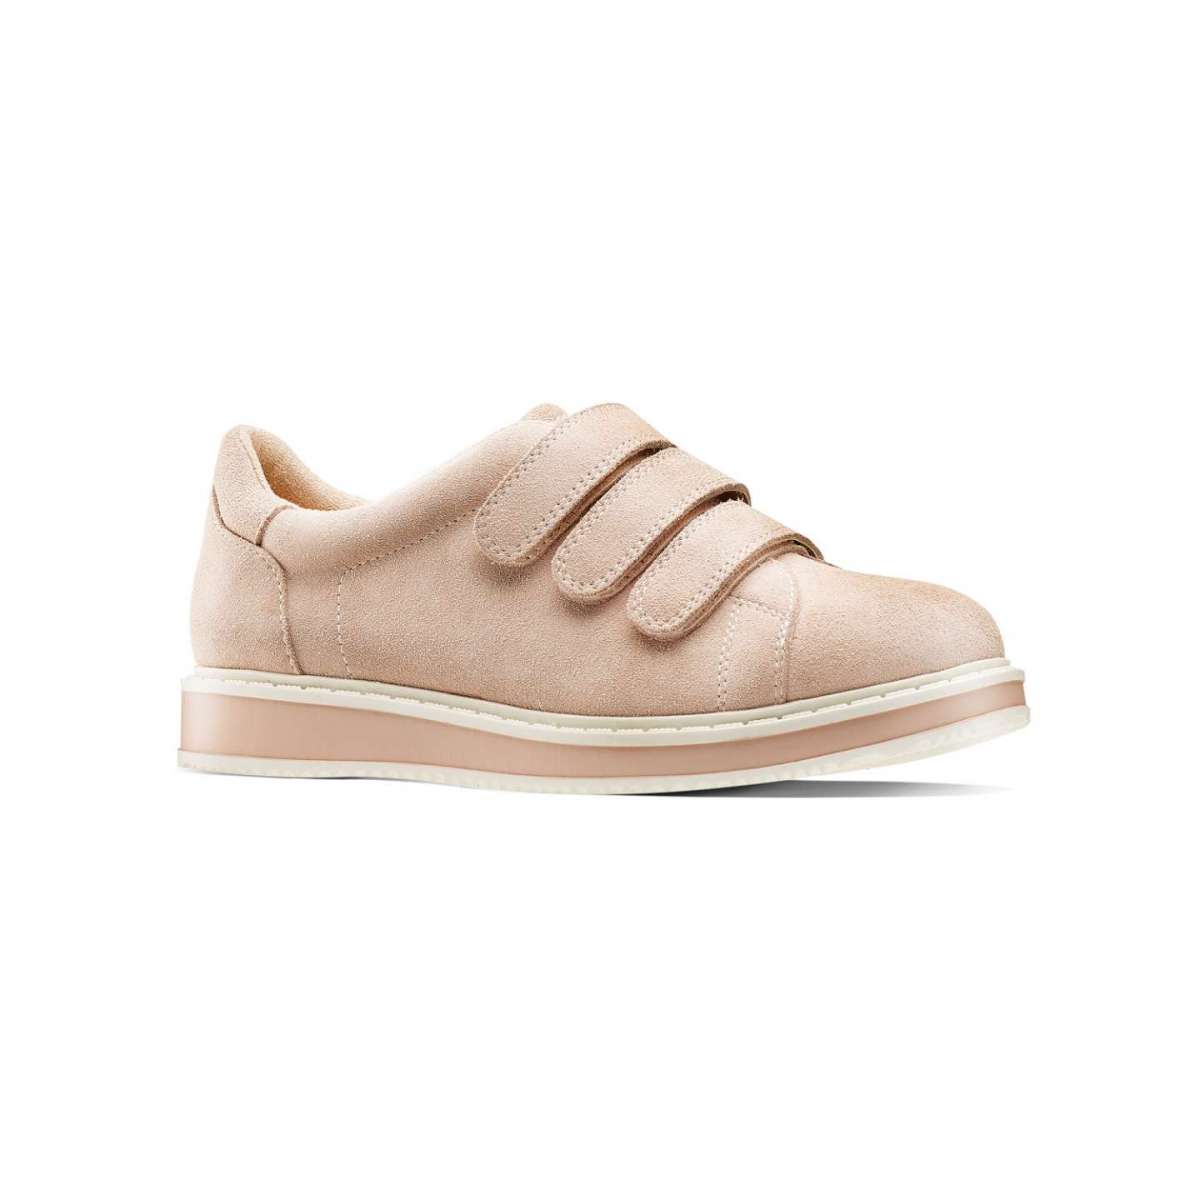 Sneakers in suede Bata a 39,99 euro